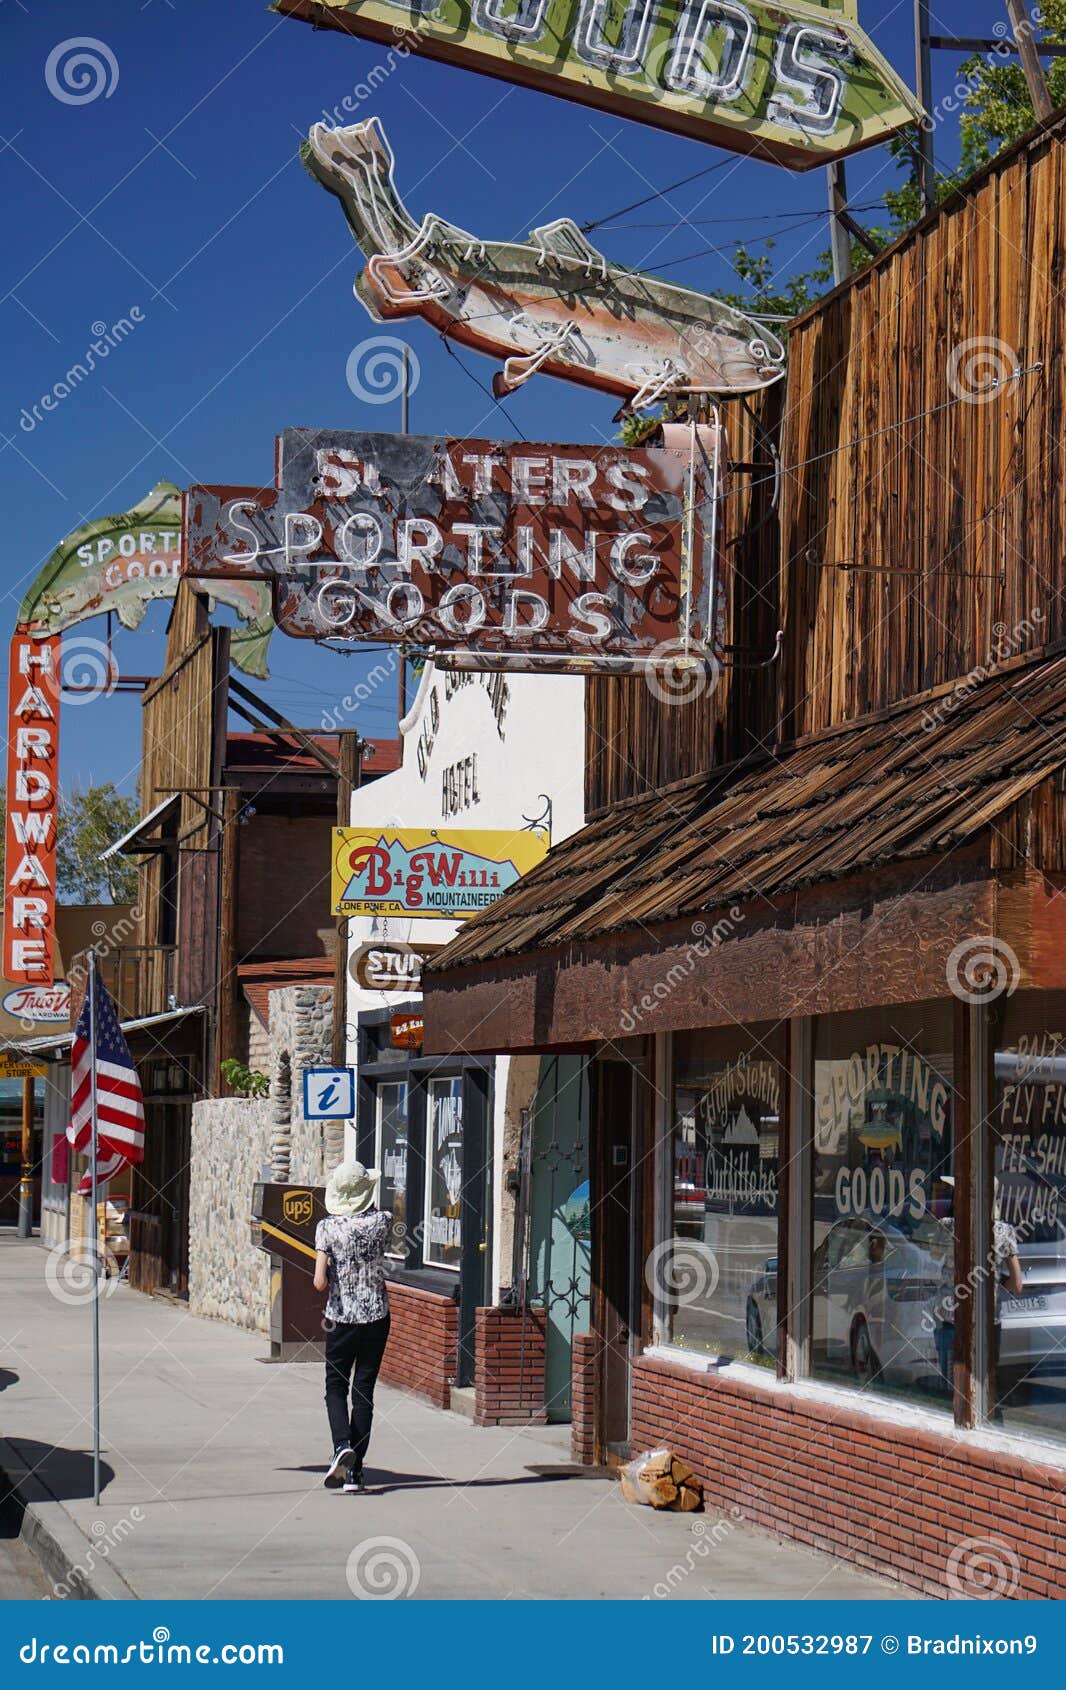 Sporting Goods Store in Lone Pine, California with Distinctive Neon Sign  Editorial Photography - Image of recreation, american: 200532987